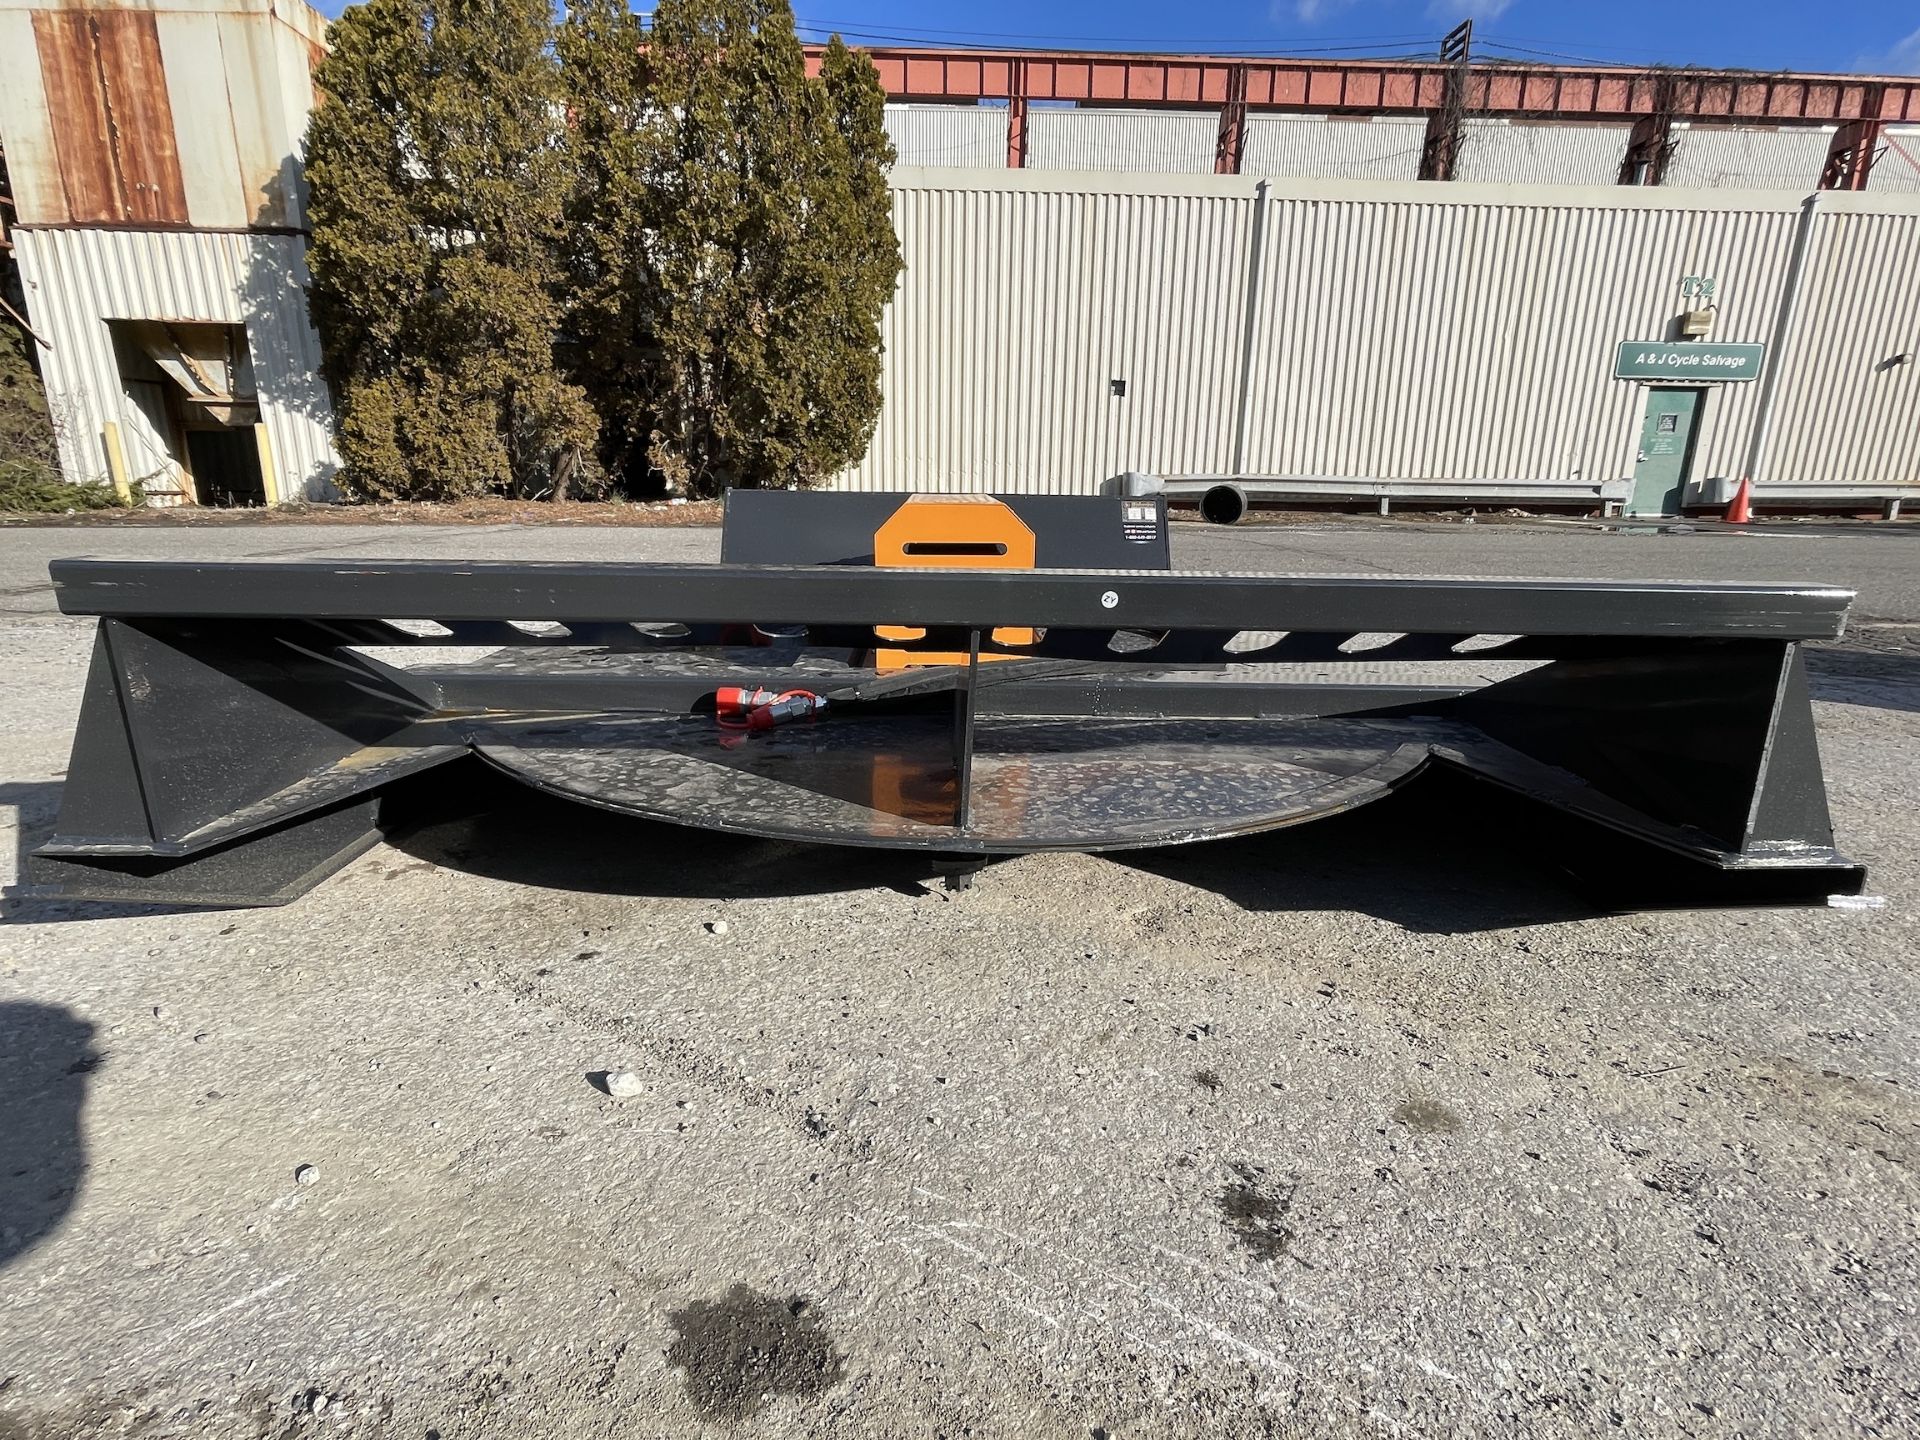 Brand New 72" Skid Steer Brush Cutter Attachment (C423E) - Image 7 of 10